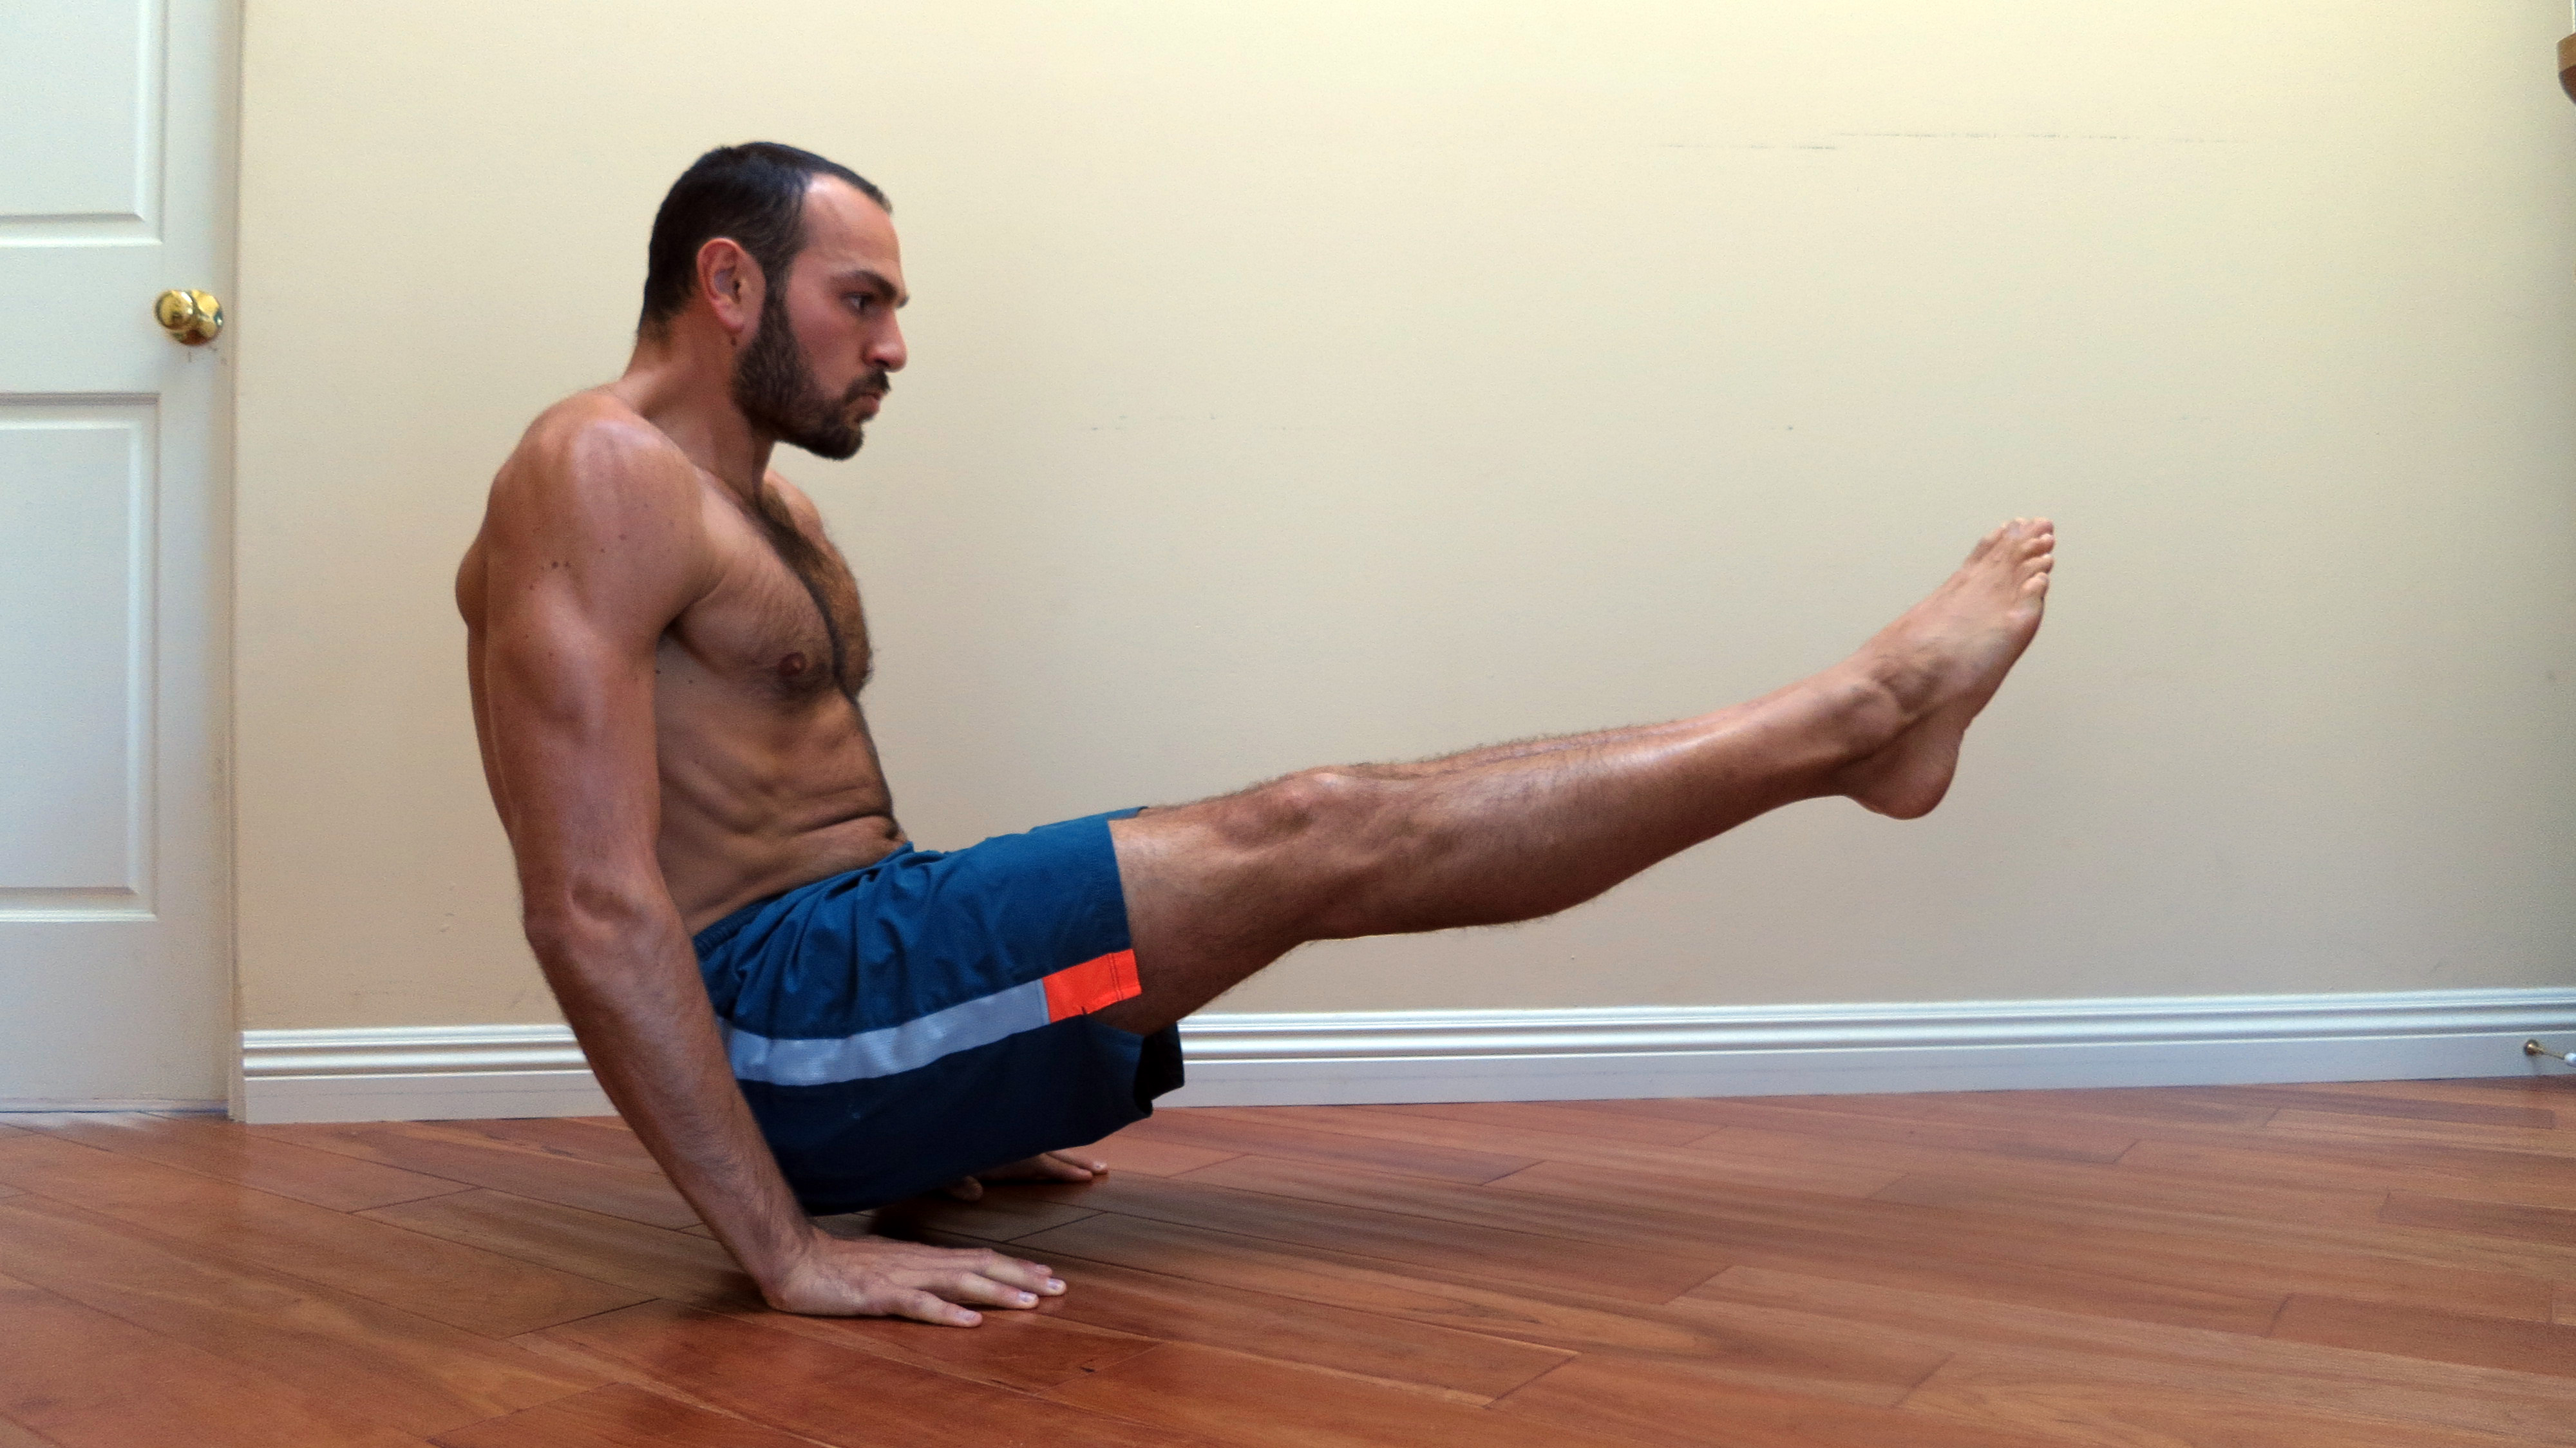 How long can you hold the L-sit? Here's a few ways to improve